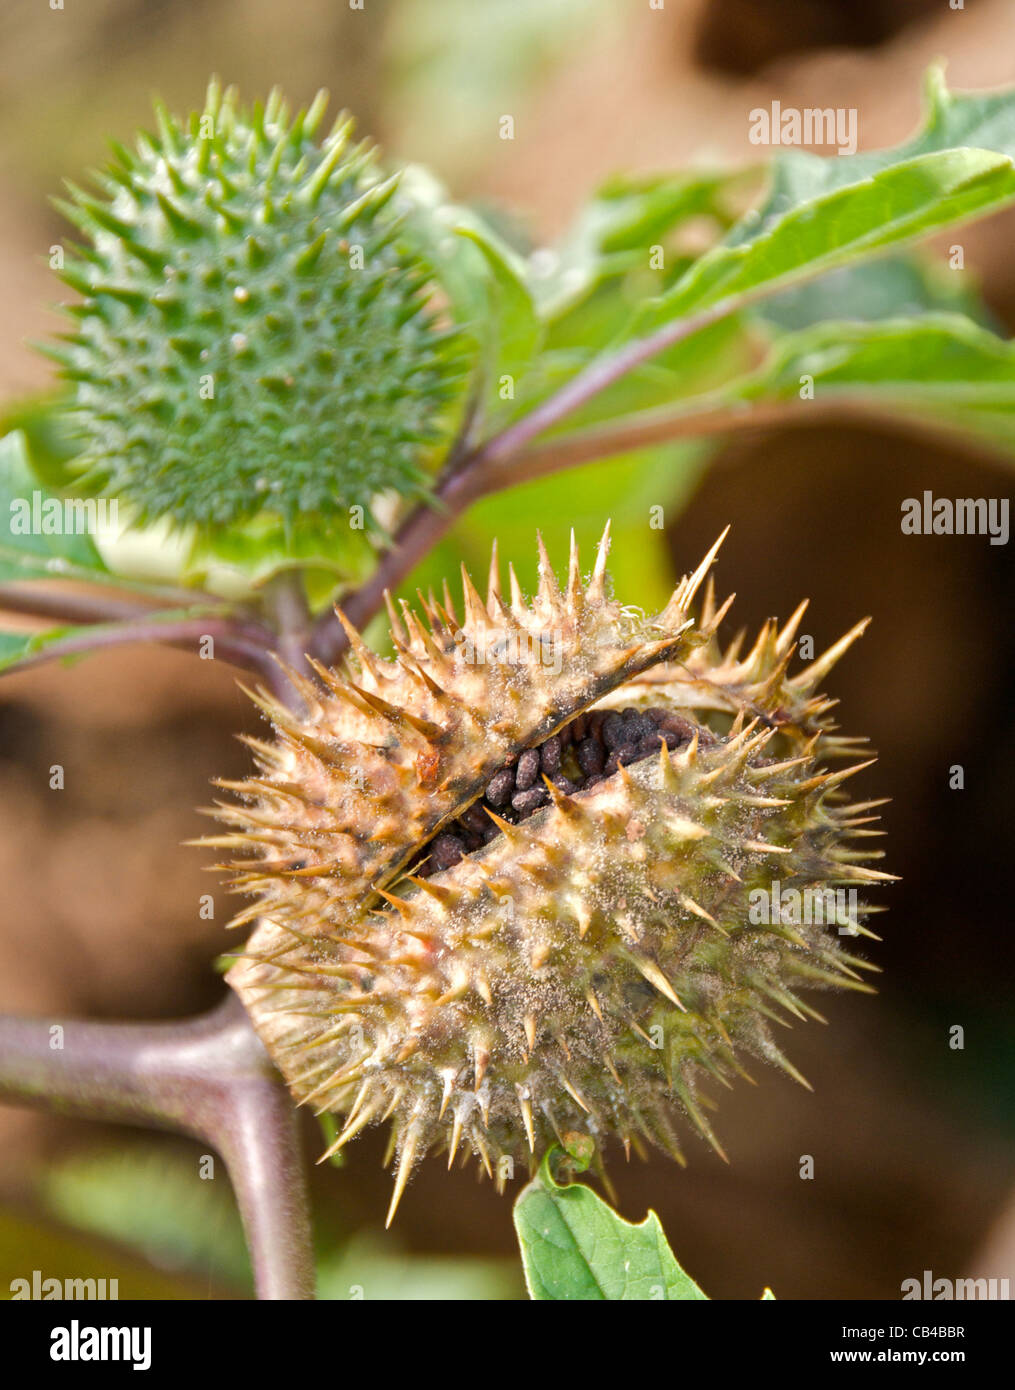 Thornapple thorn apple thorn-apple poisonous plant also known as Jimson Weed. This is the ripe seed head of the Datura stramonium. Stock Photo